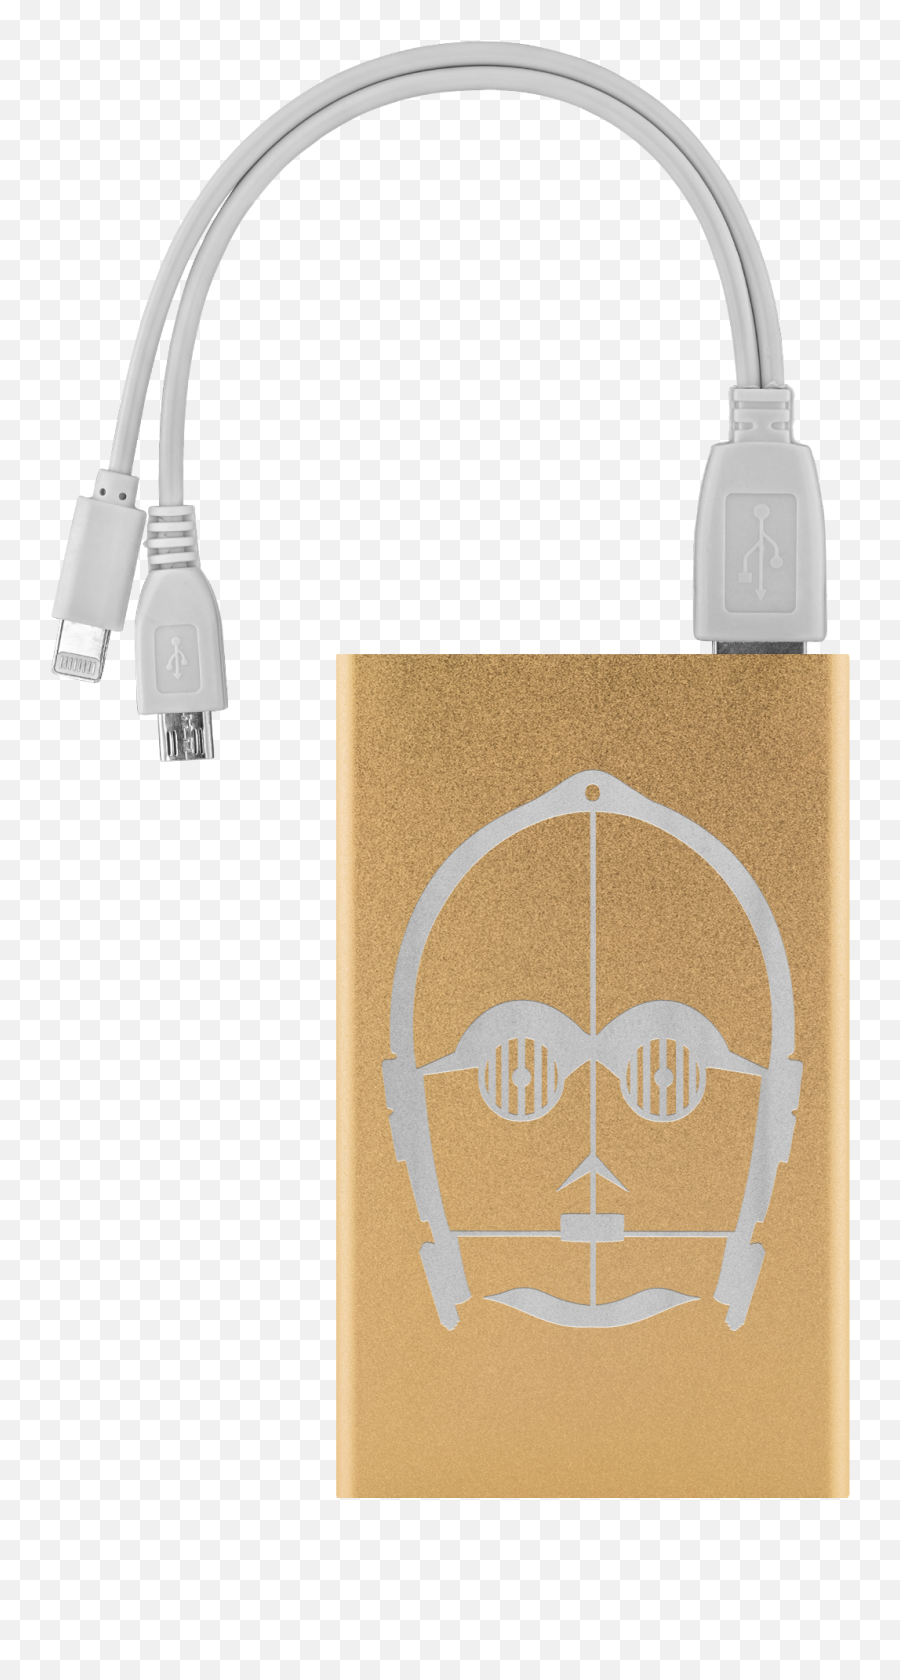 C - 3po Png C3po Etched Portable Power Bank Battery Portable,C3po Icon